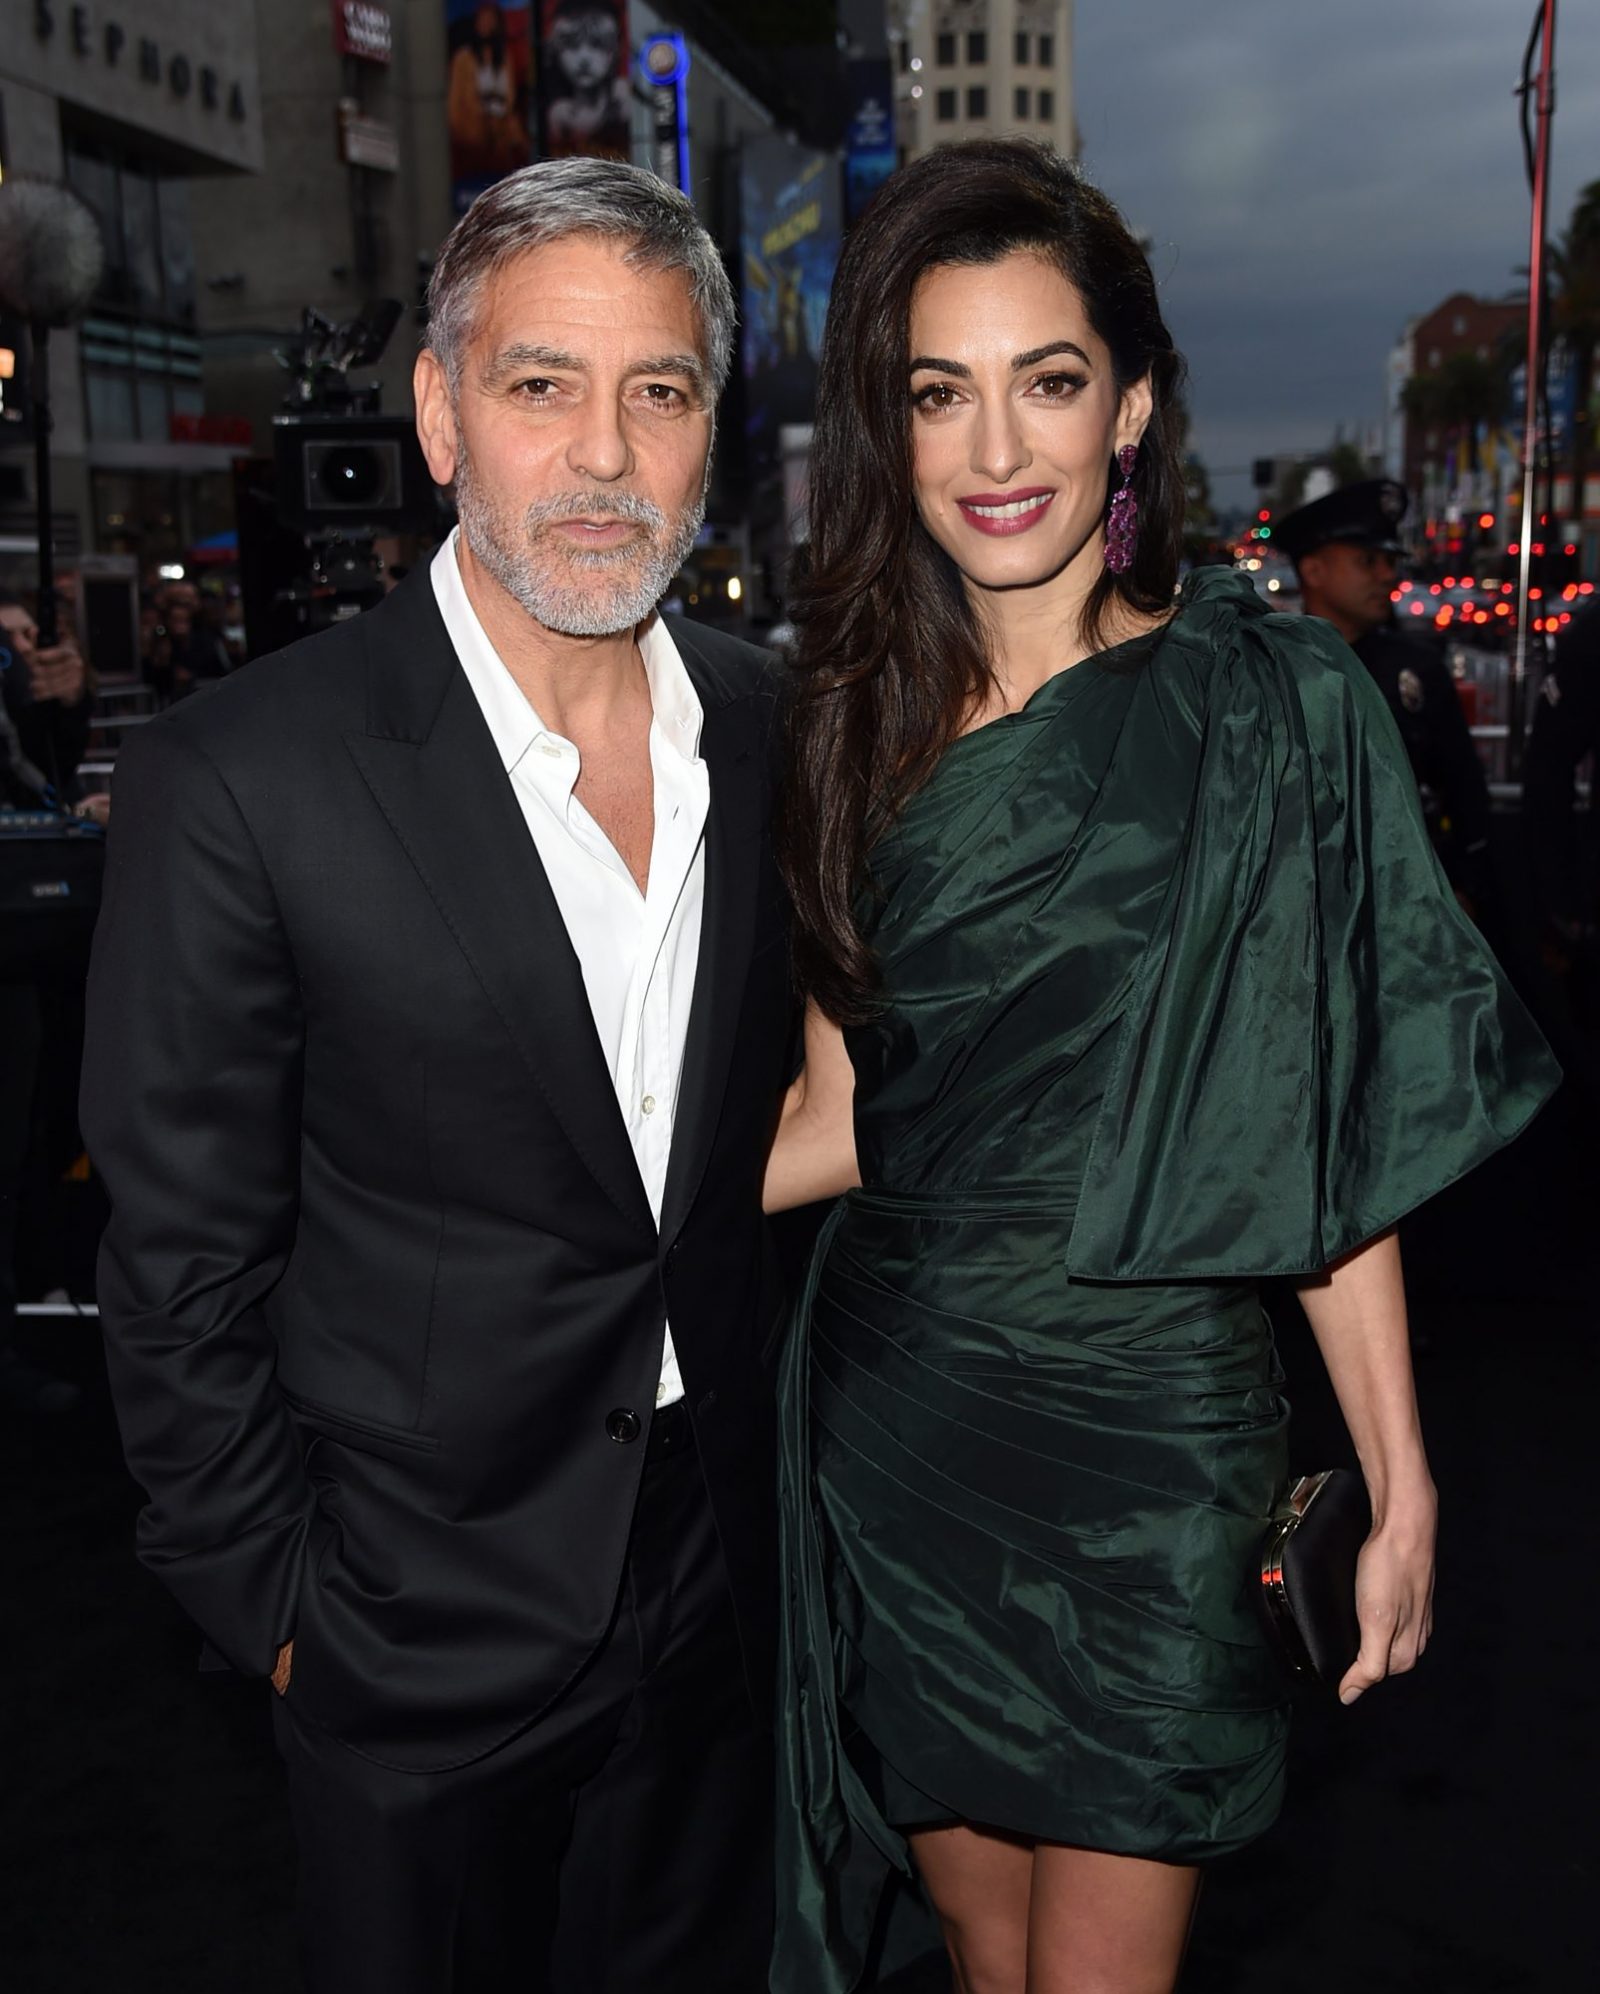 You got: Amal and George Clooney! Choose Your Flavor Combos and We’ll Reveal Which Celebrity Couple 🌟 You and Your Partner Are Most Like